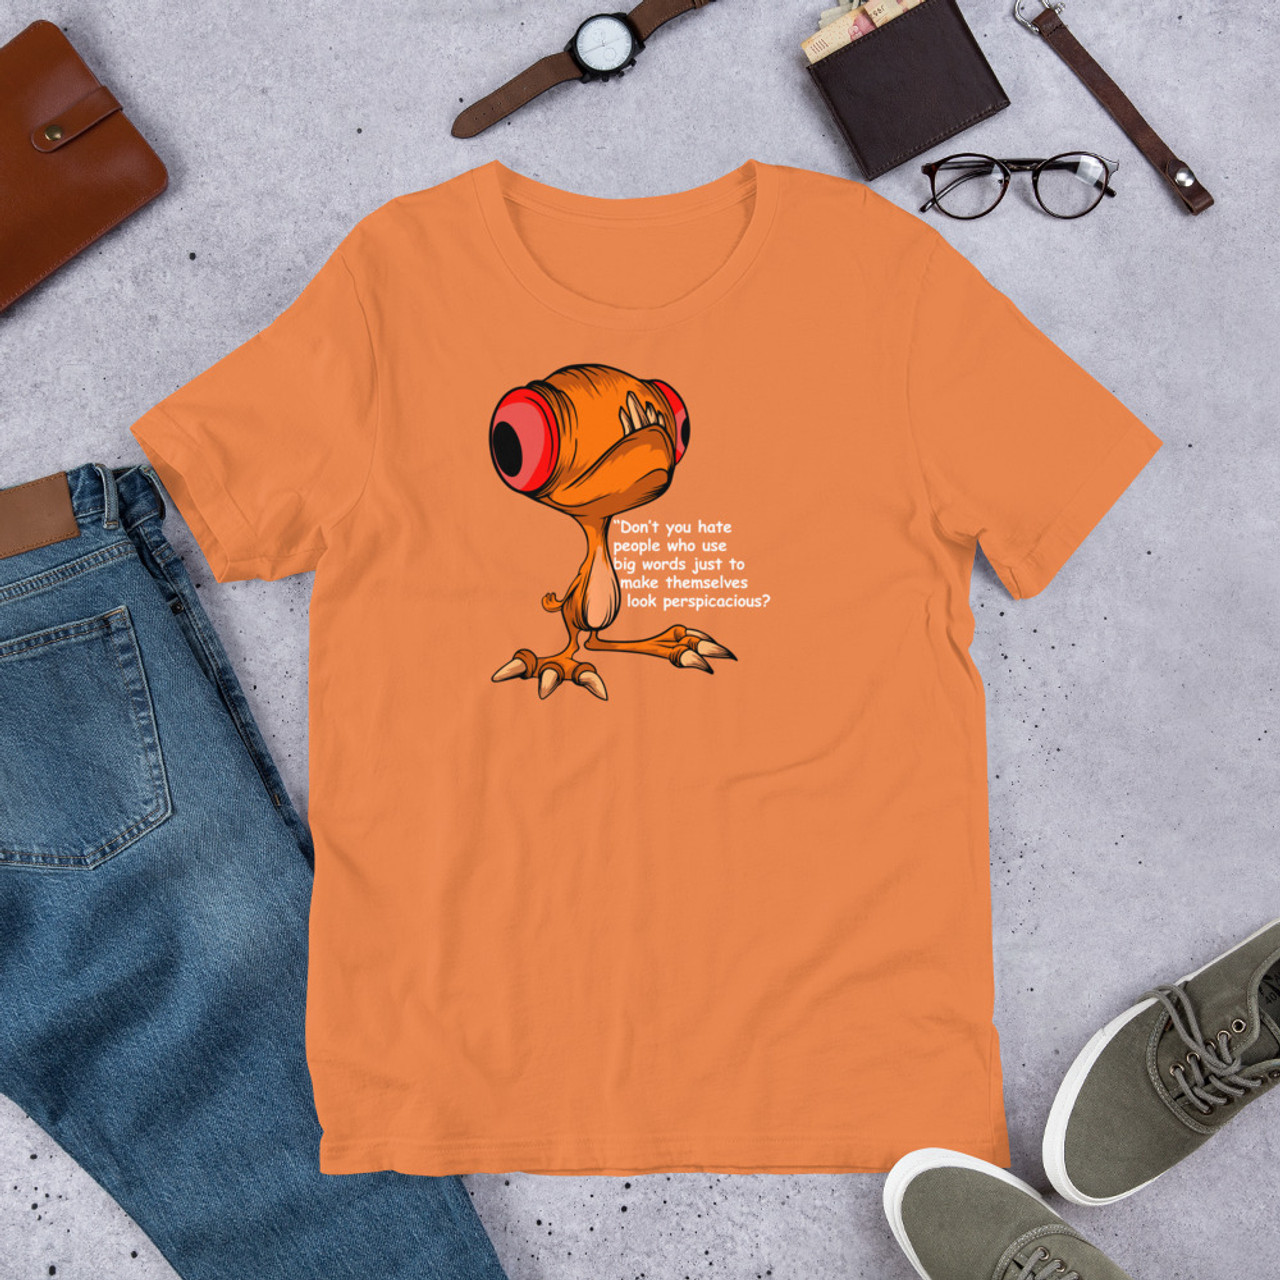 Burnt Orange T-Shirt - Bella + Canvas 3001 Don't you hate people who use big words